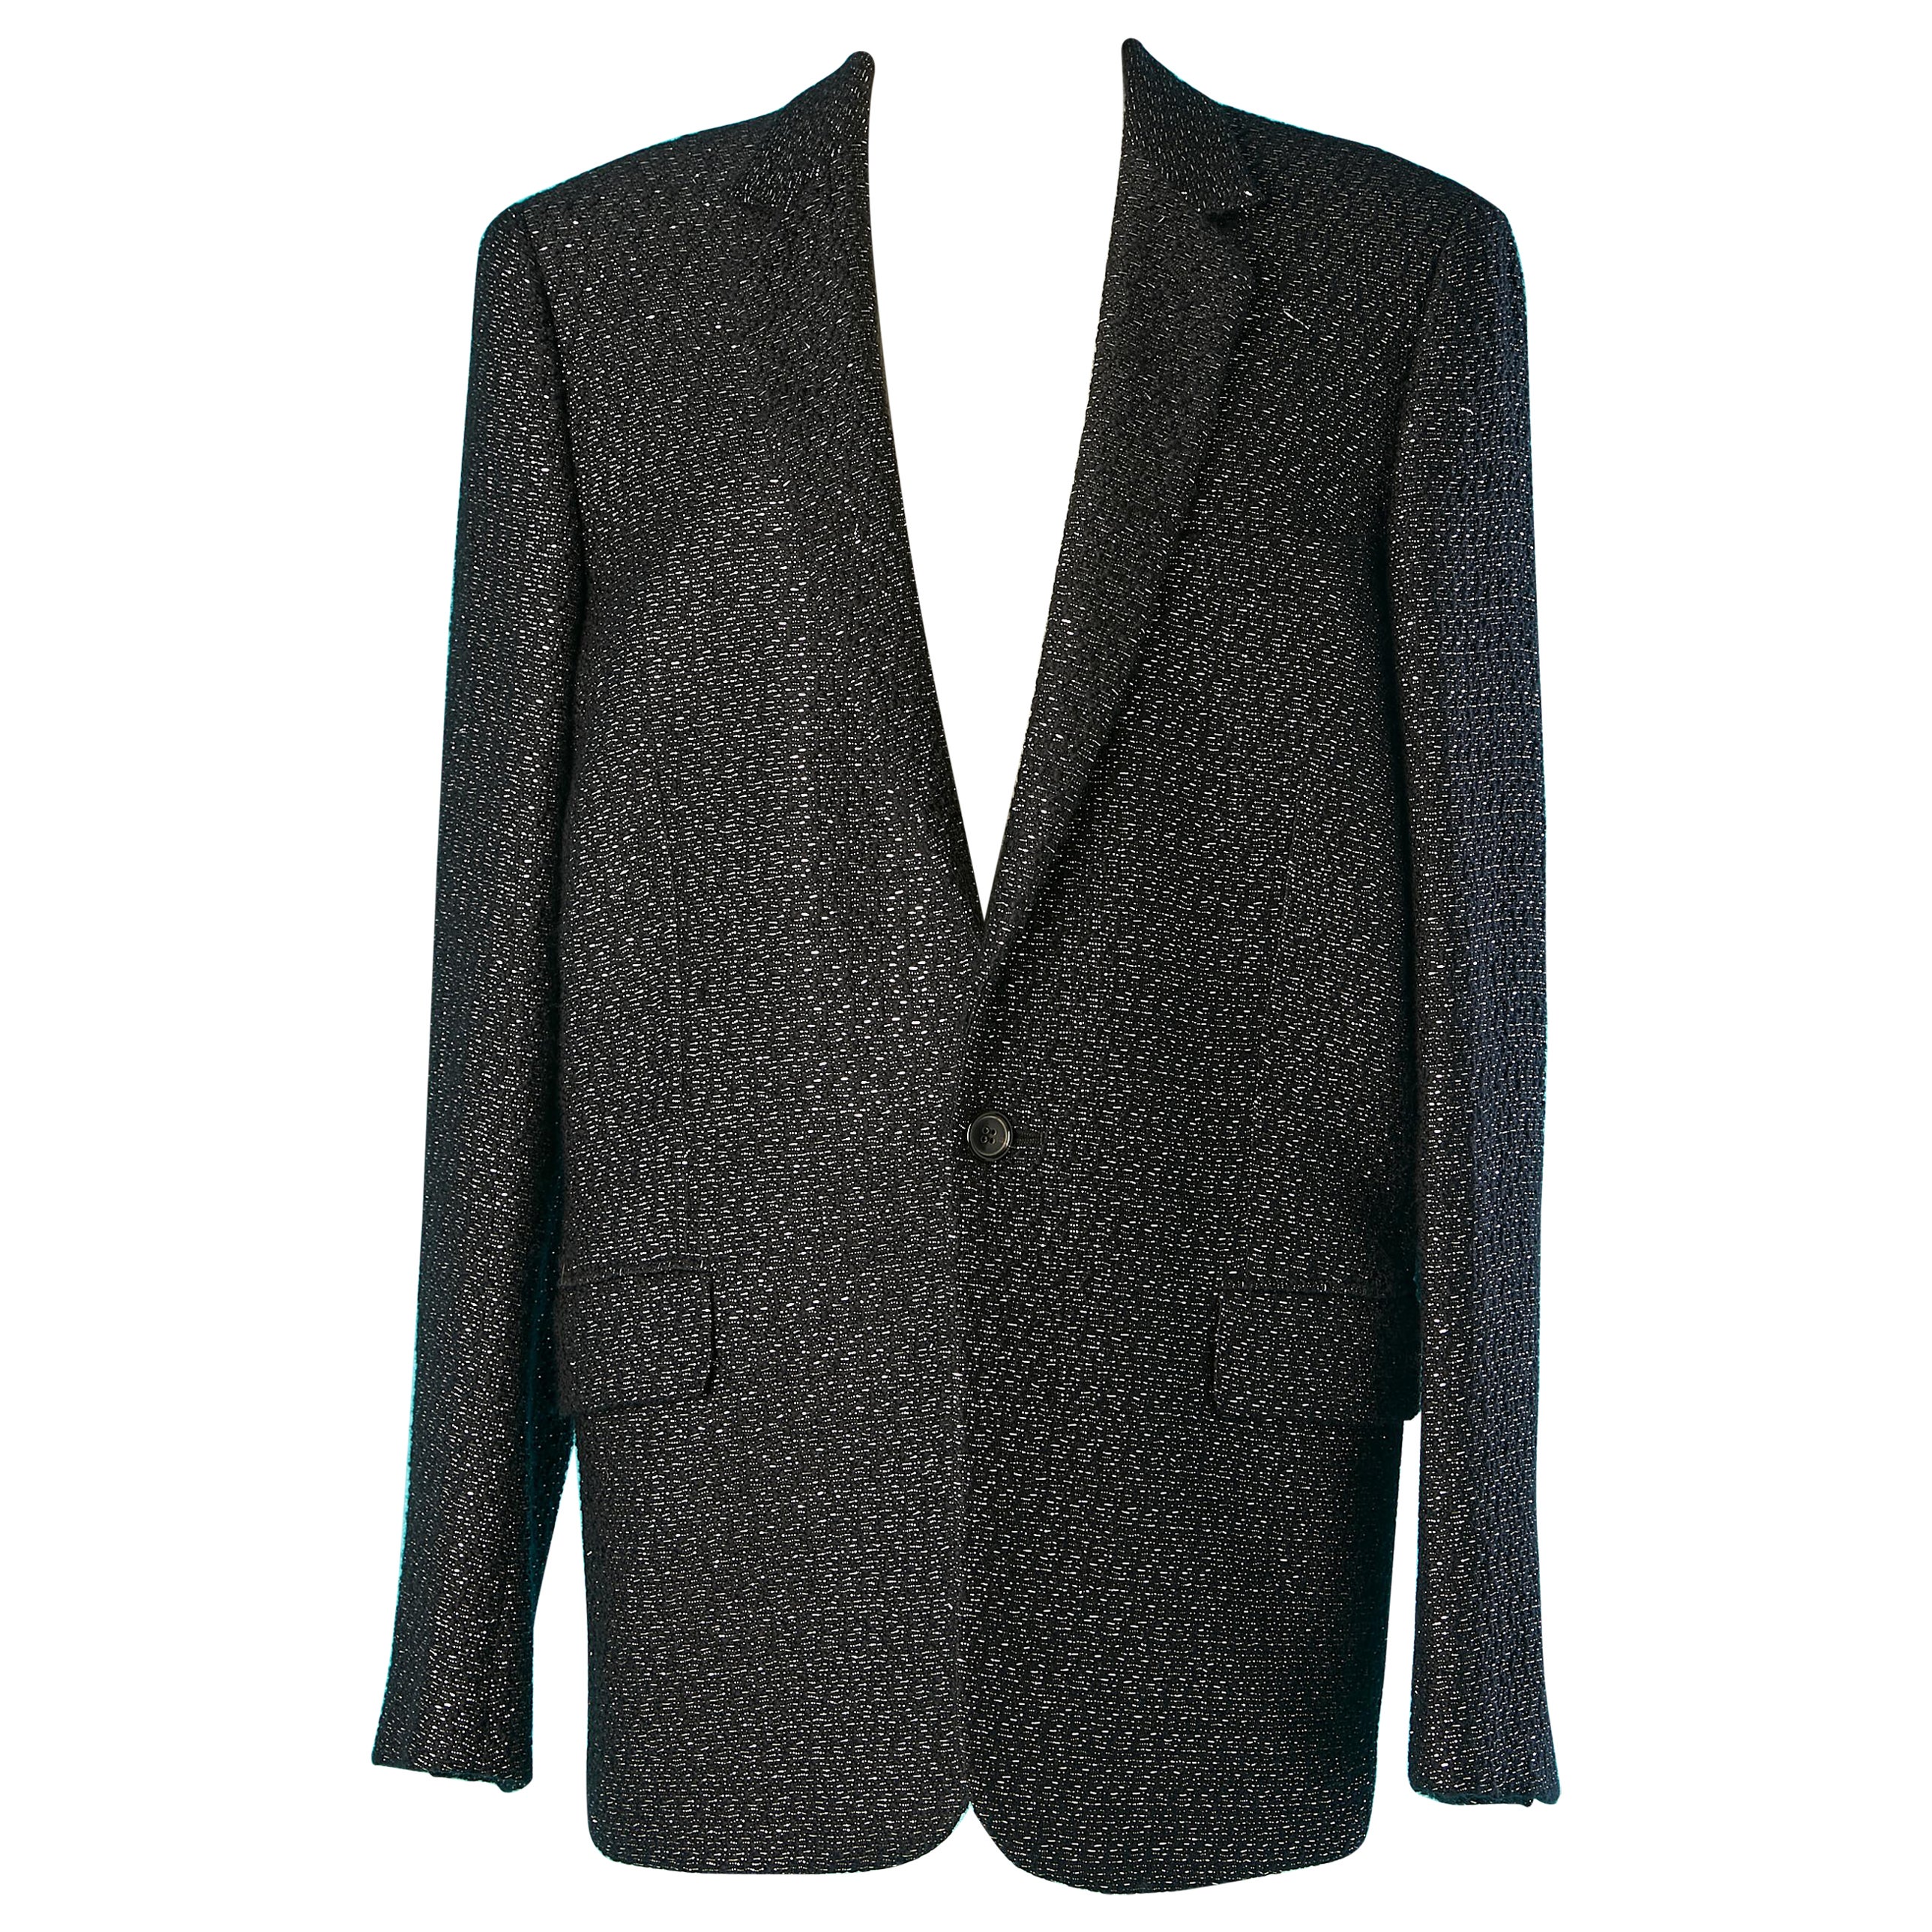 Black wool and silver lurex single breasted blazer Dior Homme by Hedi Slimane  For Sale